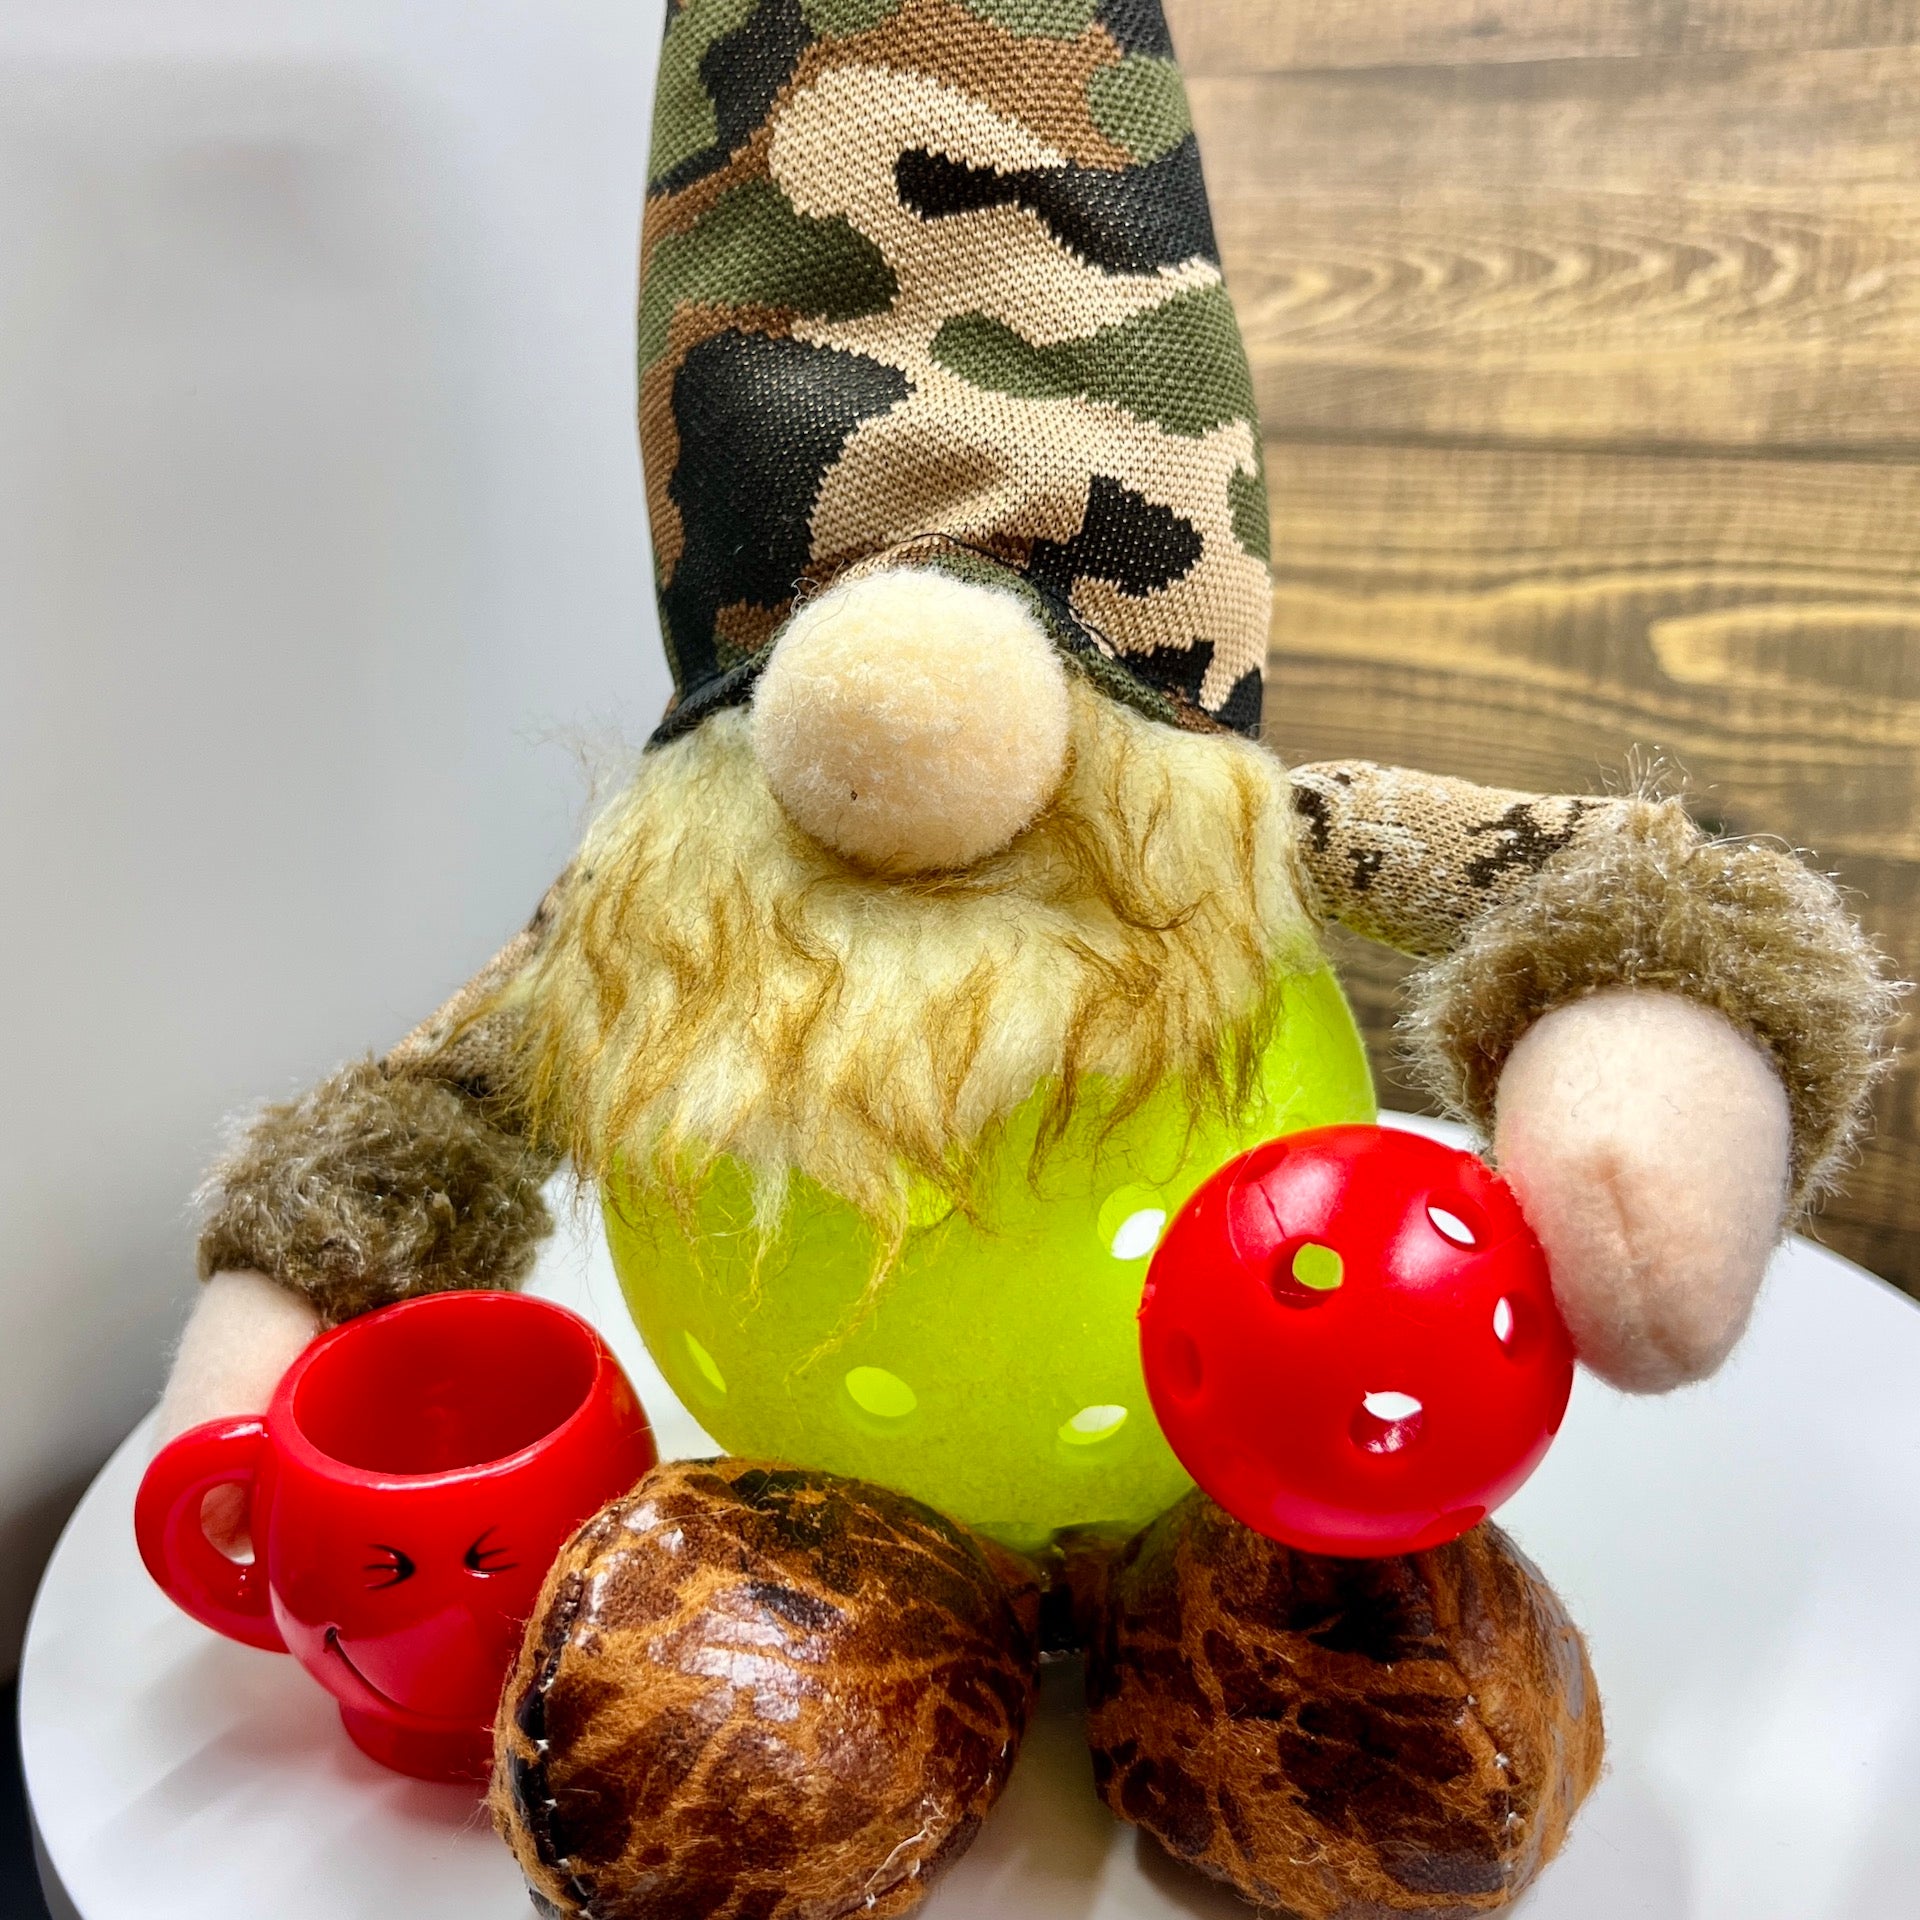 LARGE CAMO & COFFEE PICKLEBALL GNOME DECORATION AND GIFT!!  These large-sized pickleball gnomes are perfect for decoration or gifts for your pickleball addicted friends. Each Gnome is free-sitting and has a coffee cup for enjoyment. Adding a Pickleball Gnome to your house only makes it better.